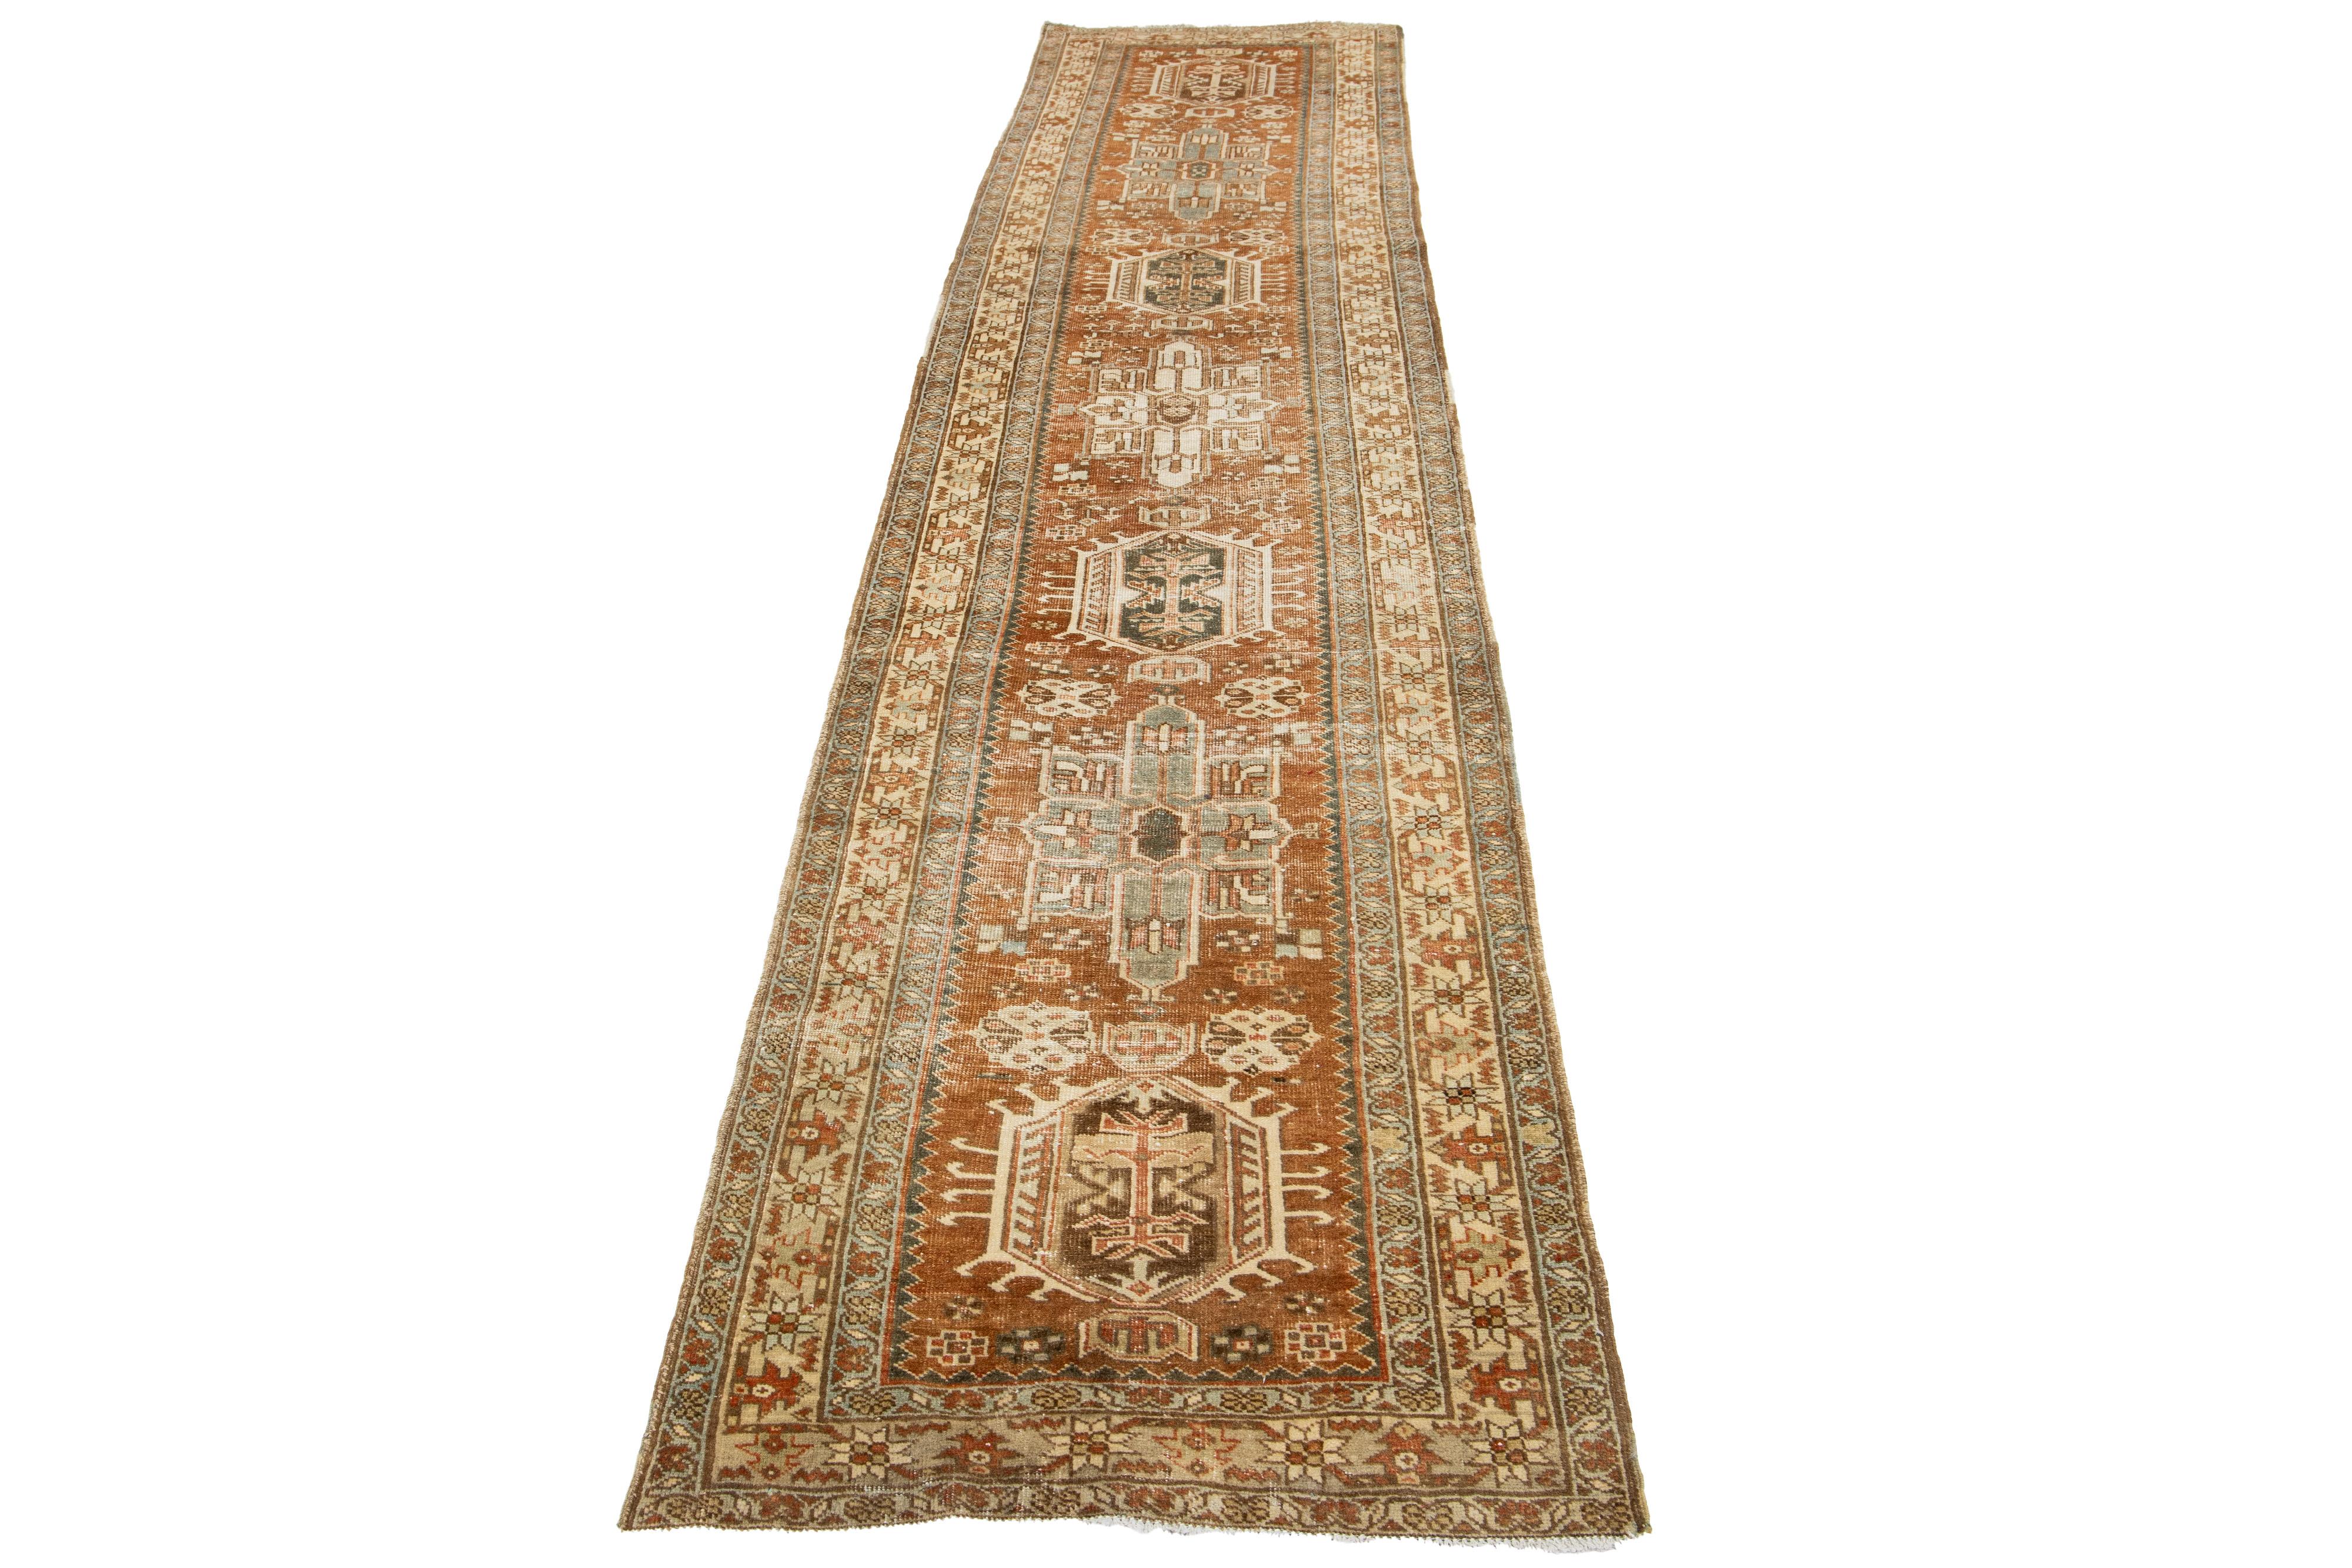 This beautiful 20th-century Heriz hand-knotted wool runner has an orange field. The piece features stunning blue, brown, and beige accents in a gorgeous tribal design.

This rug measures 2'9